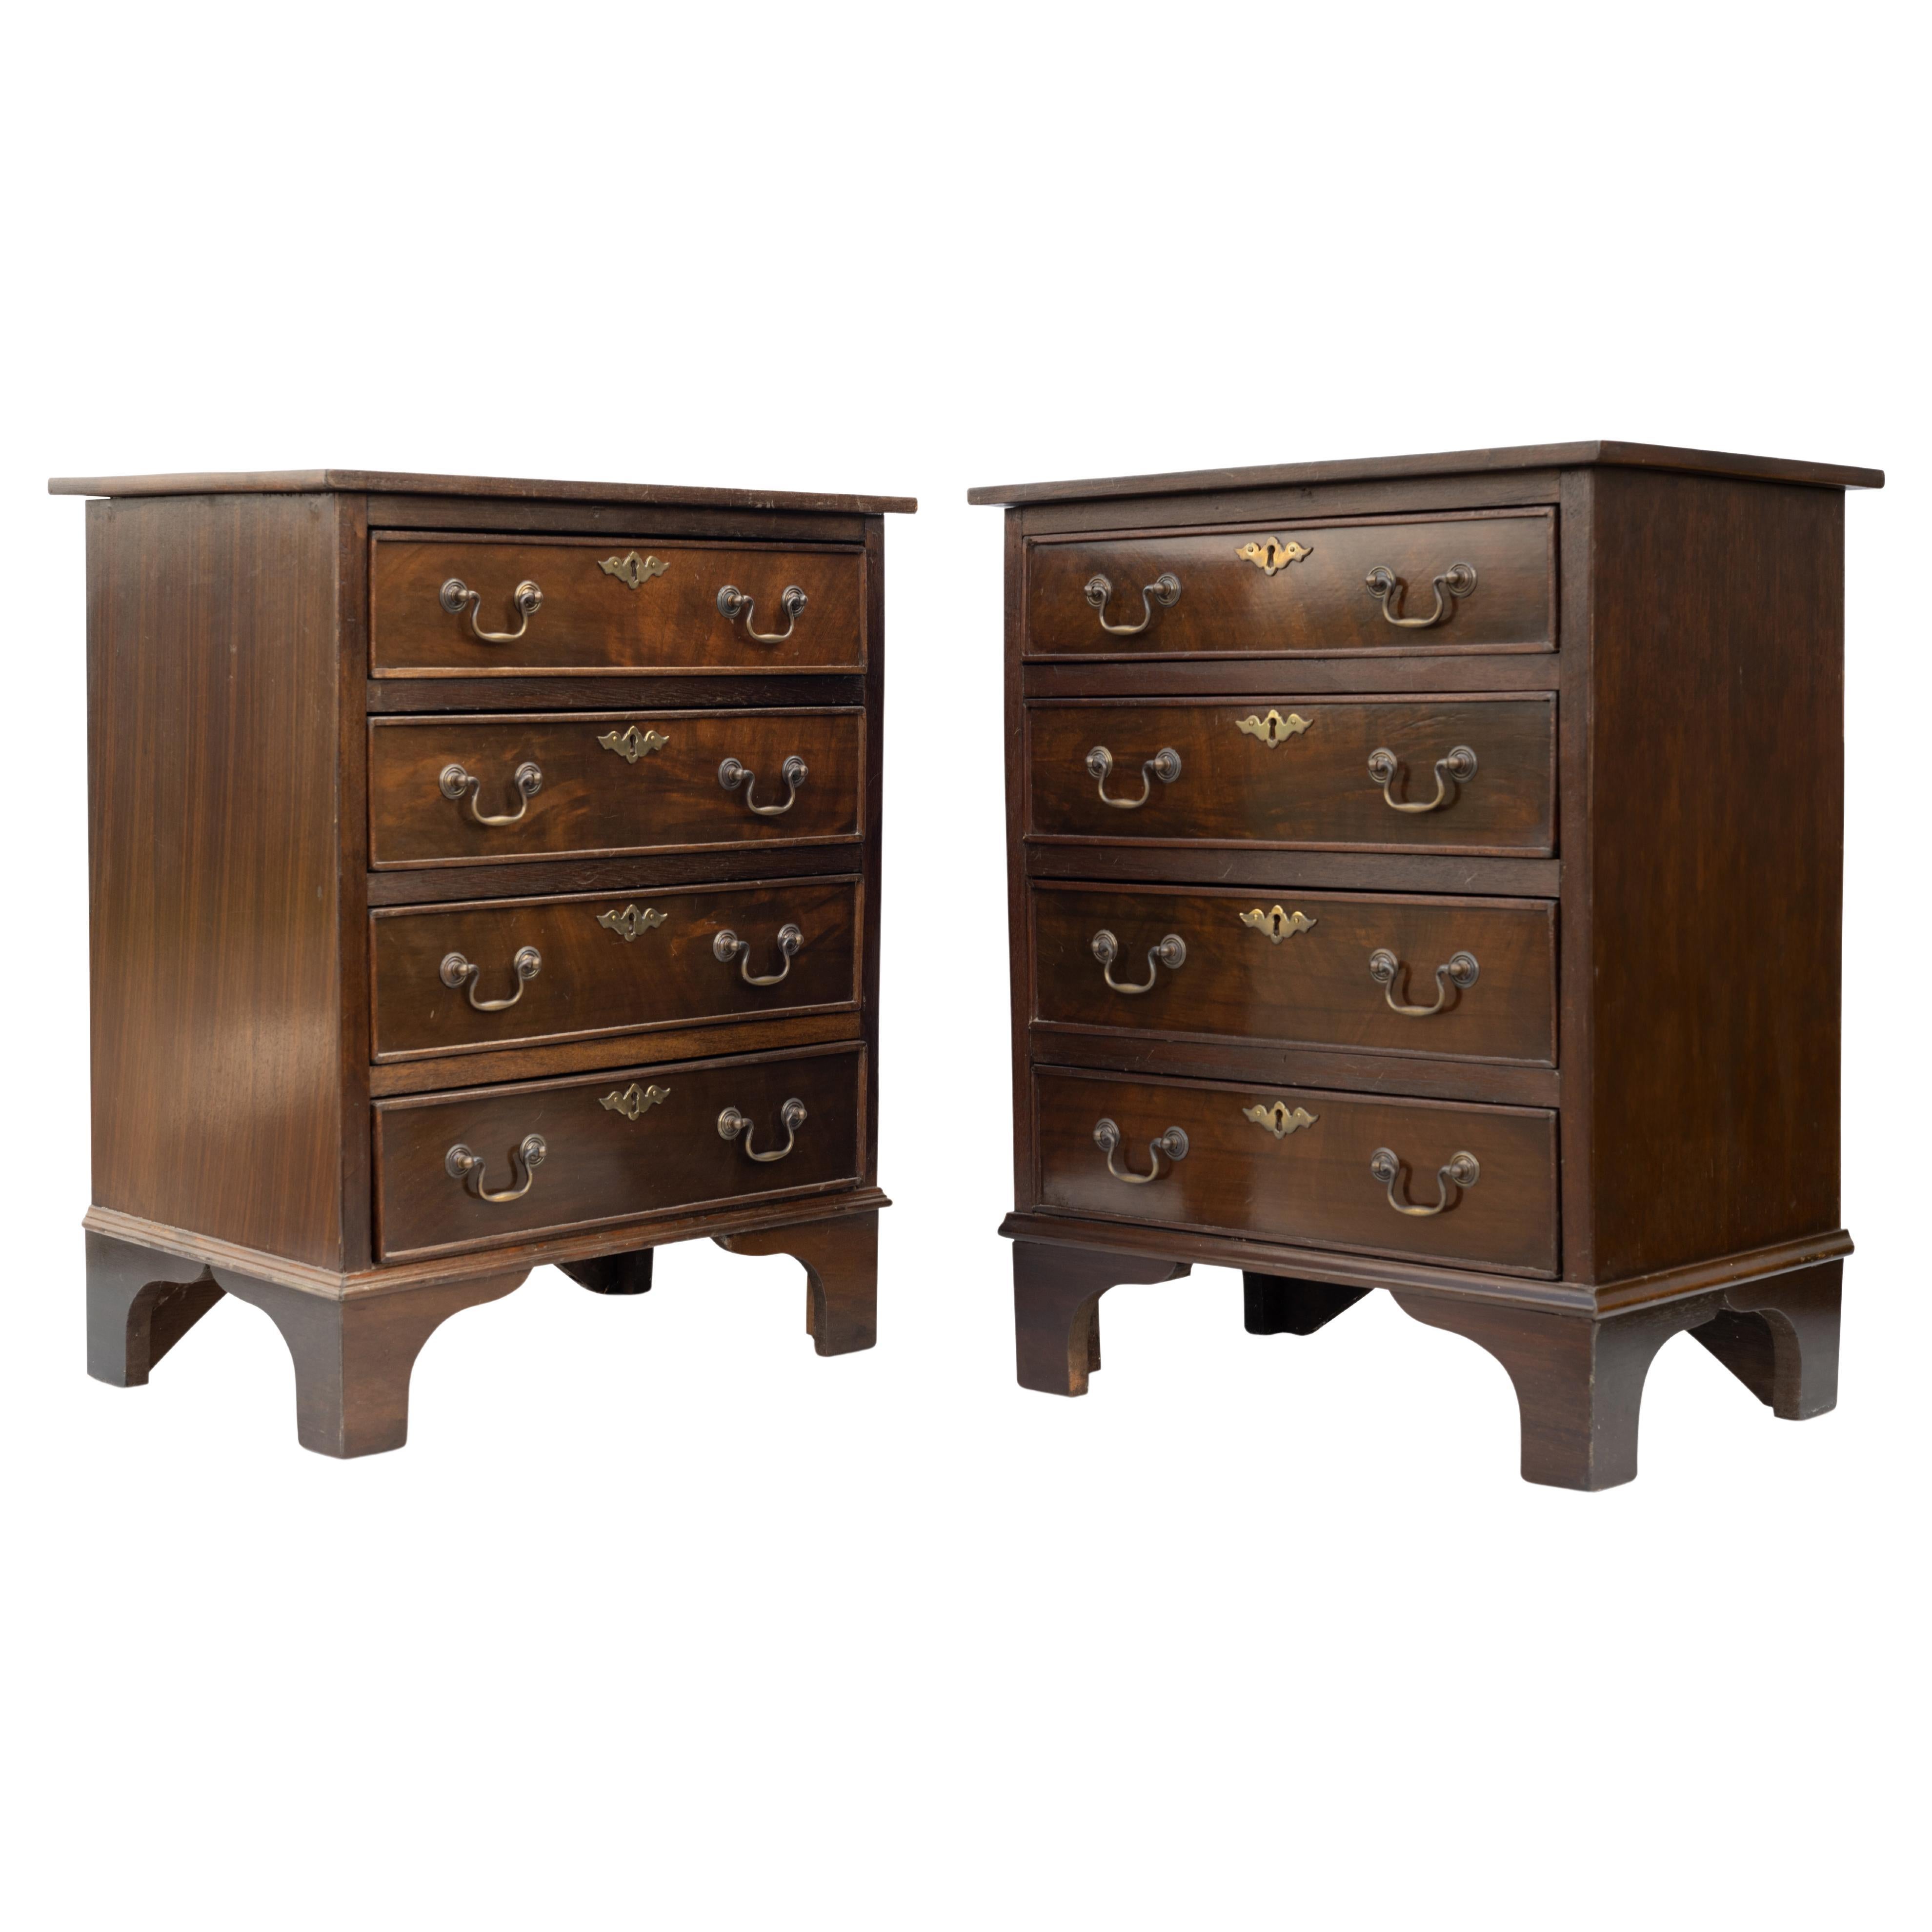 Georgian Design Pair of Antique Bedside Chest of Drawers & Brass Batwing Handles For Sale